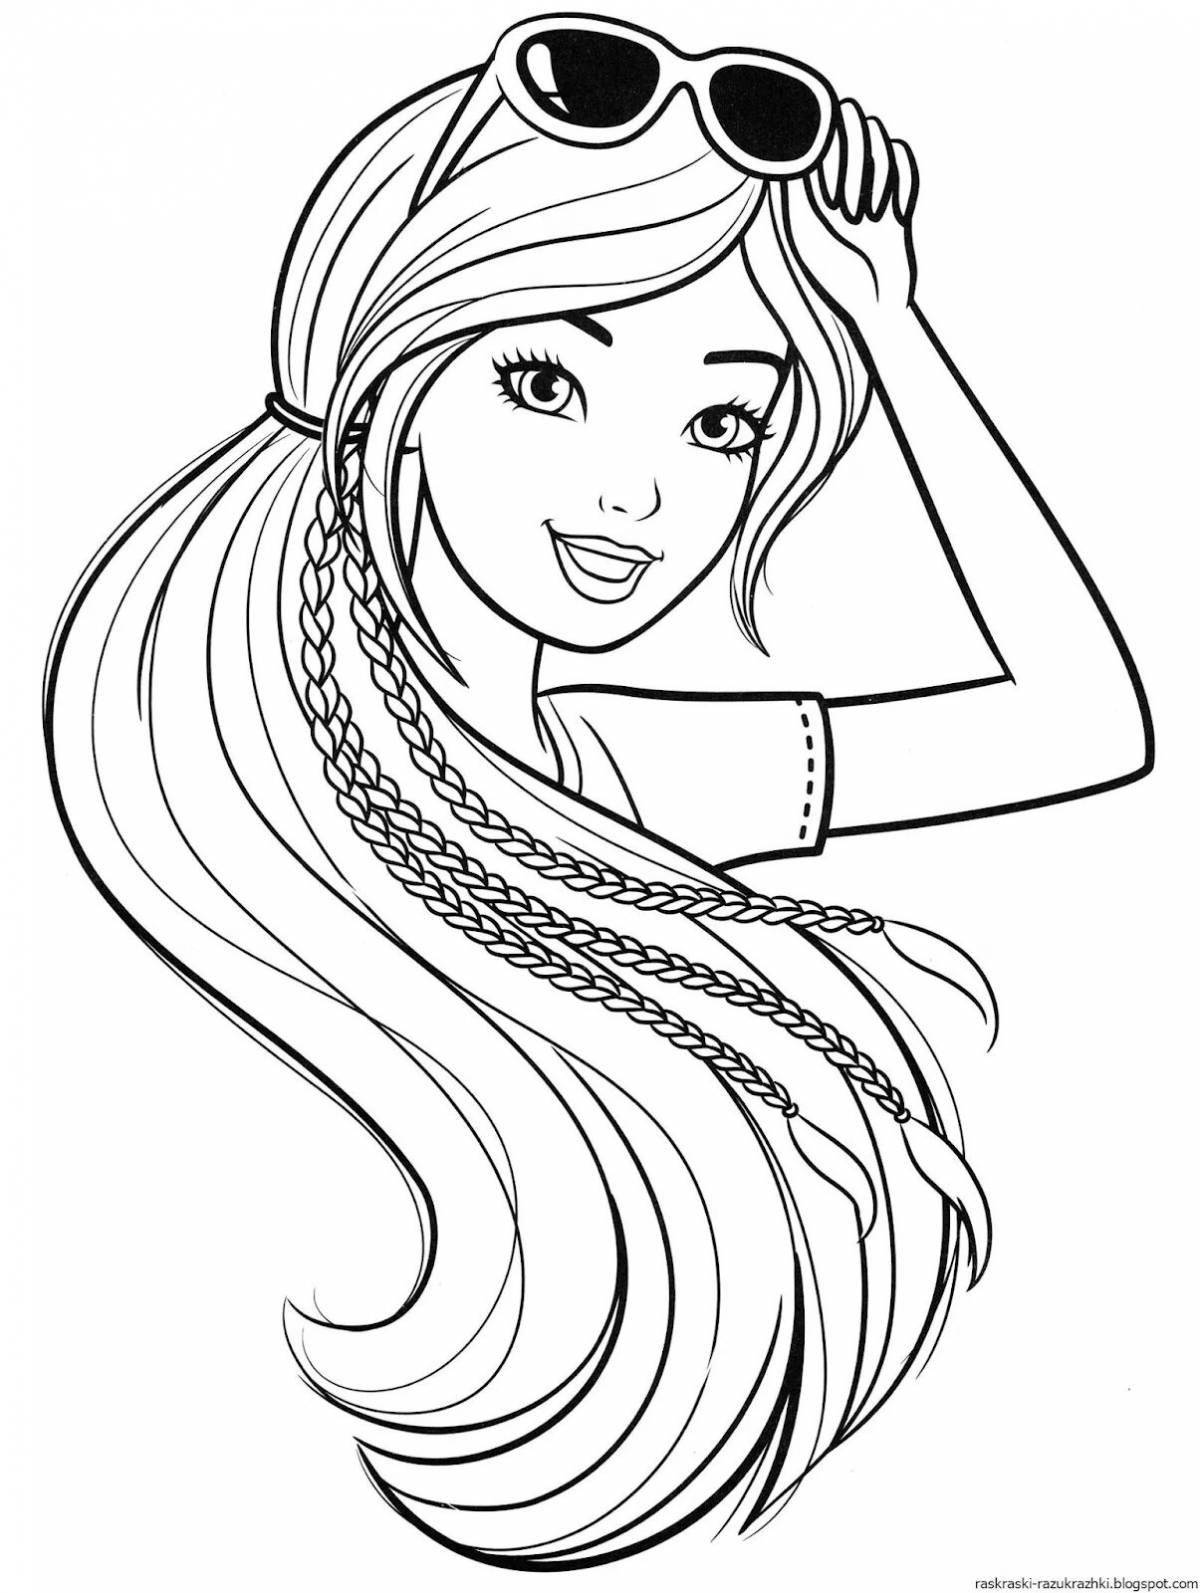 Adorable coloring book for girls 9-8 years old